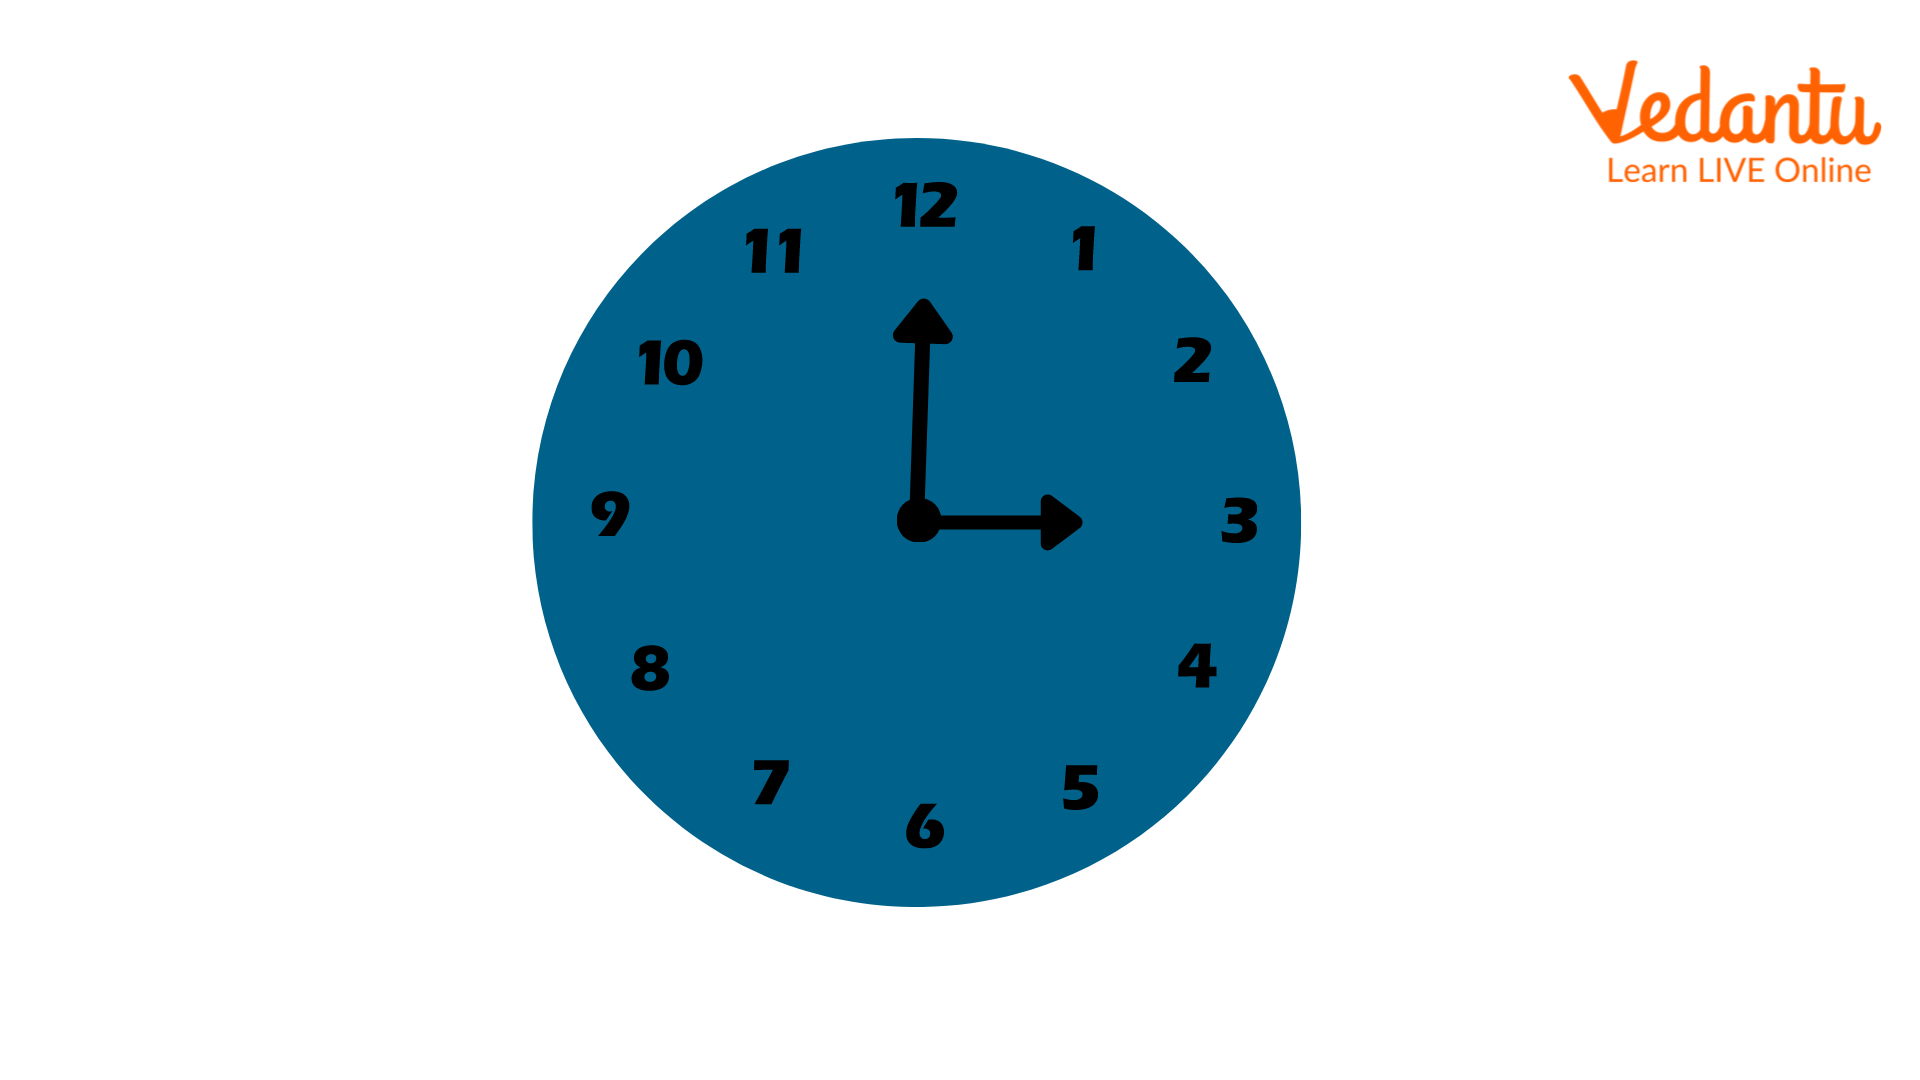 A clock, showing the time as 3 o’clock